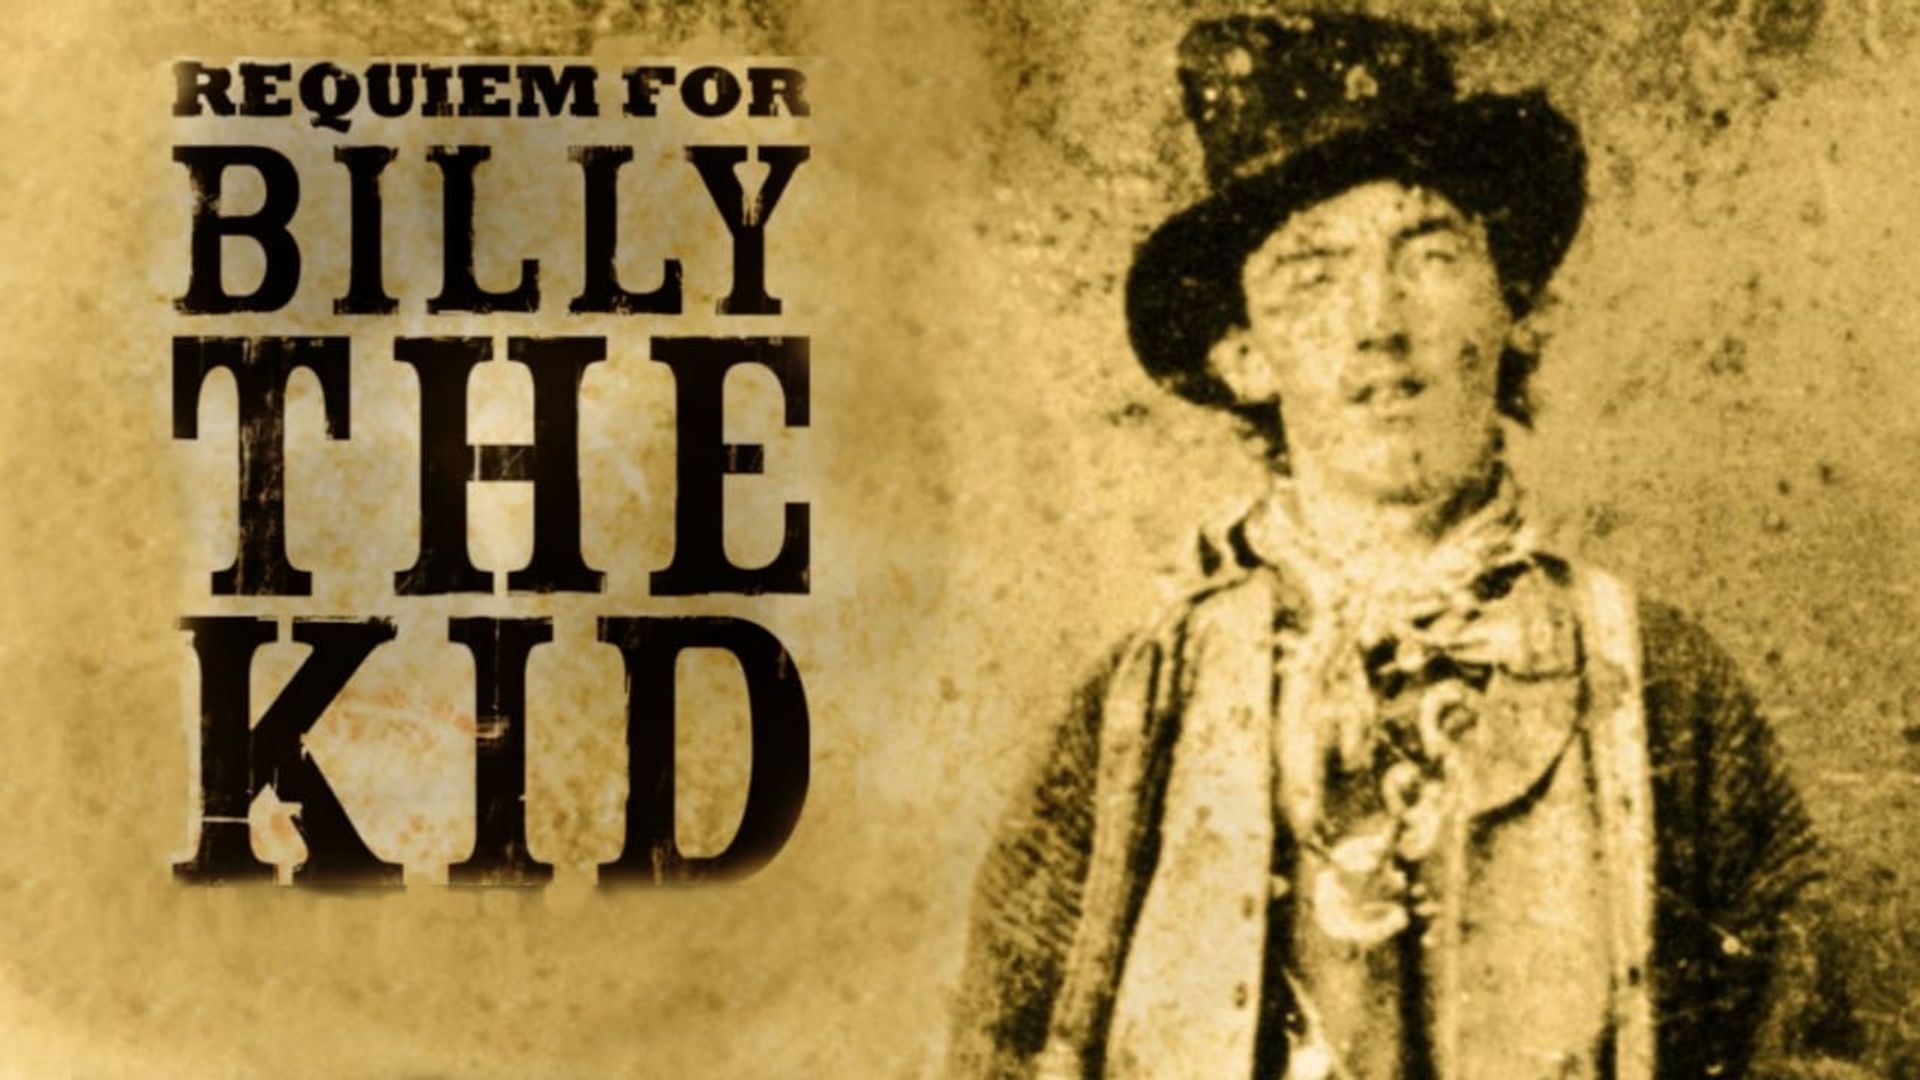 Requiem for Billy the Kid background